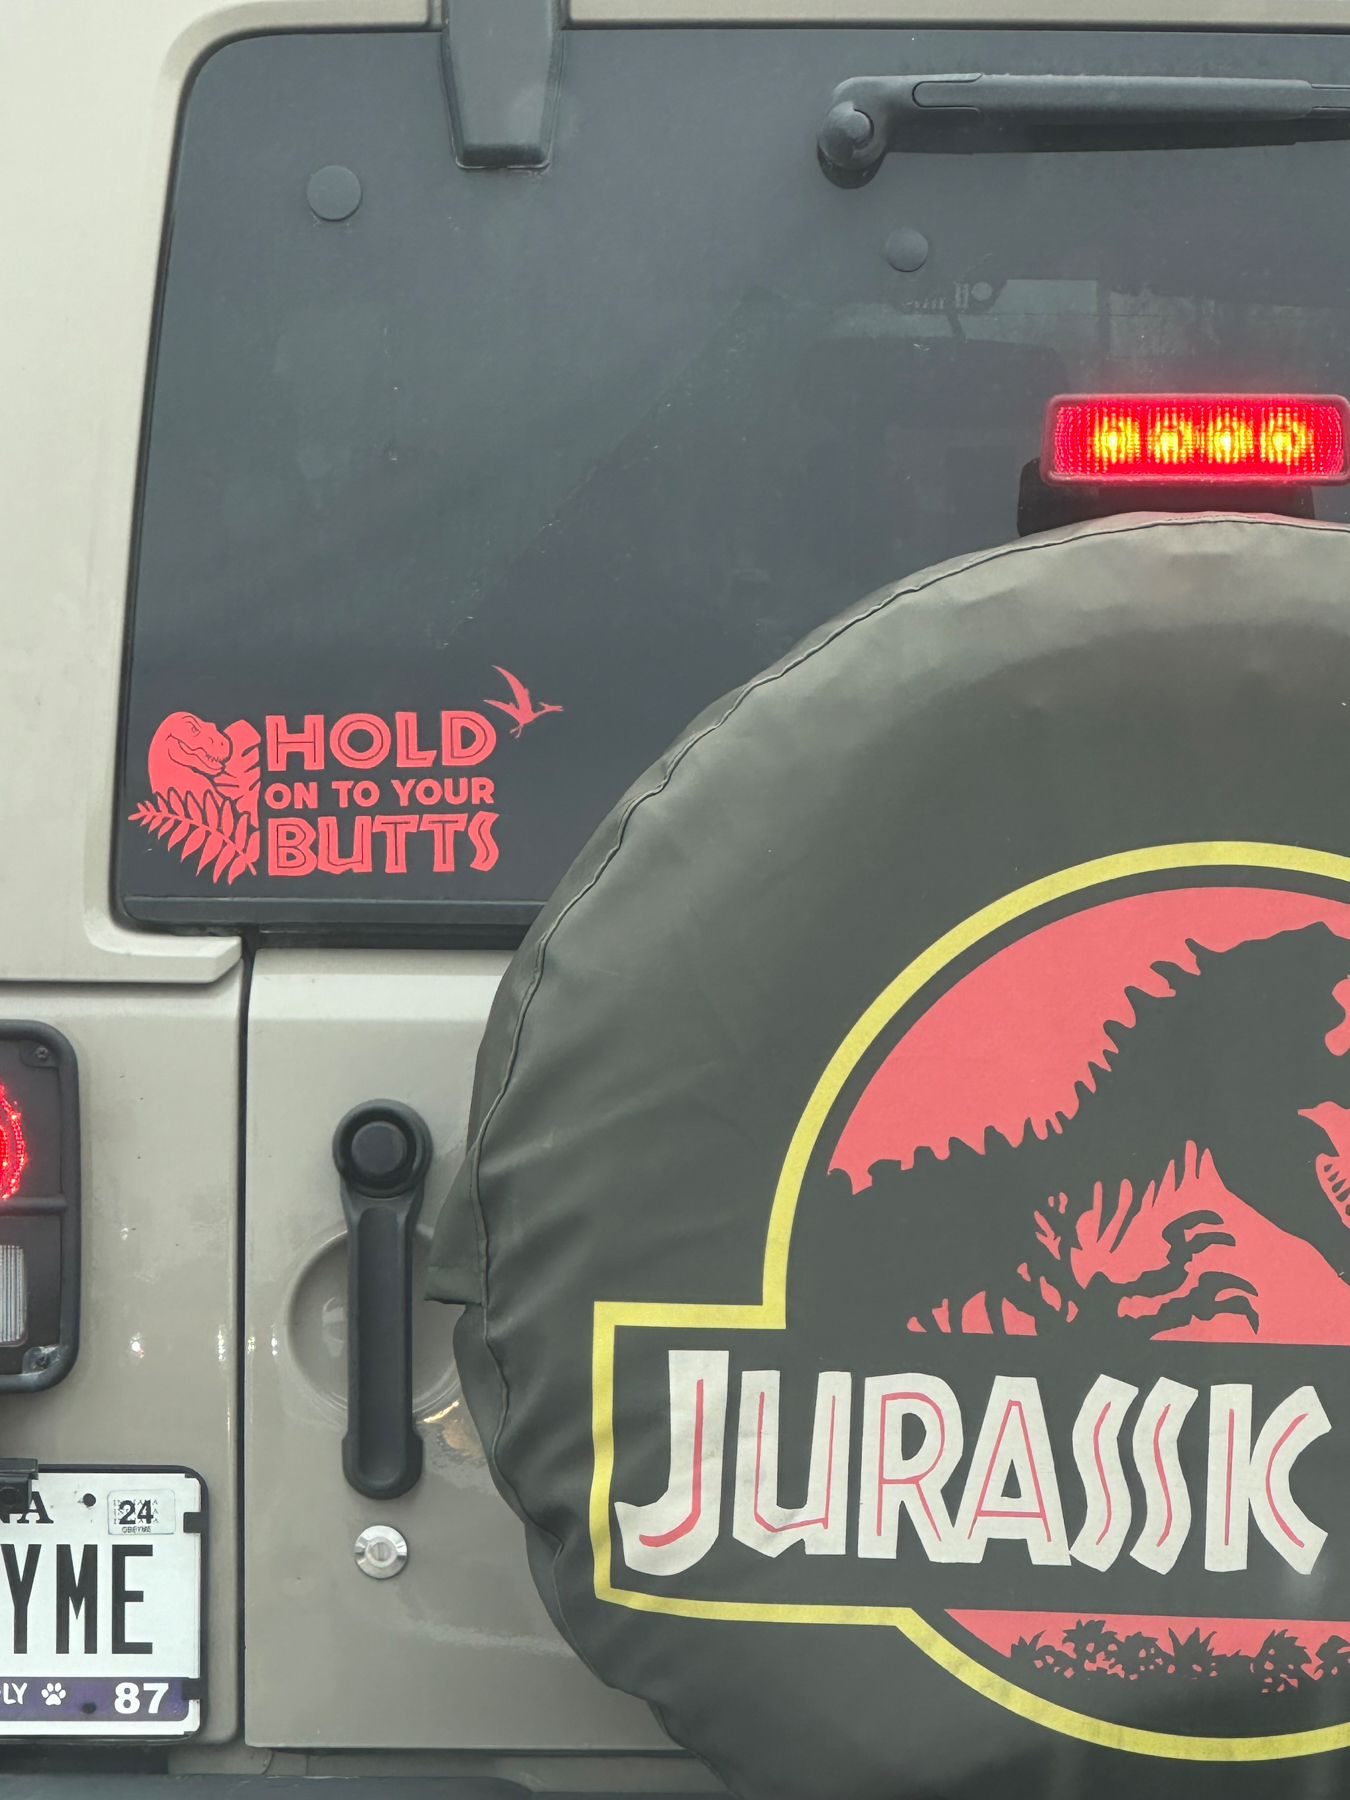 A vehicle’s rear spare tire cover featuring a stylized “Jurassic” logo with a dinosaur silhouette and the phrase “HOLD ON TO YOUR BUTTS” above it on the vehicle’s body. The car has a license plate at the bottom.